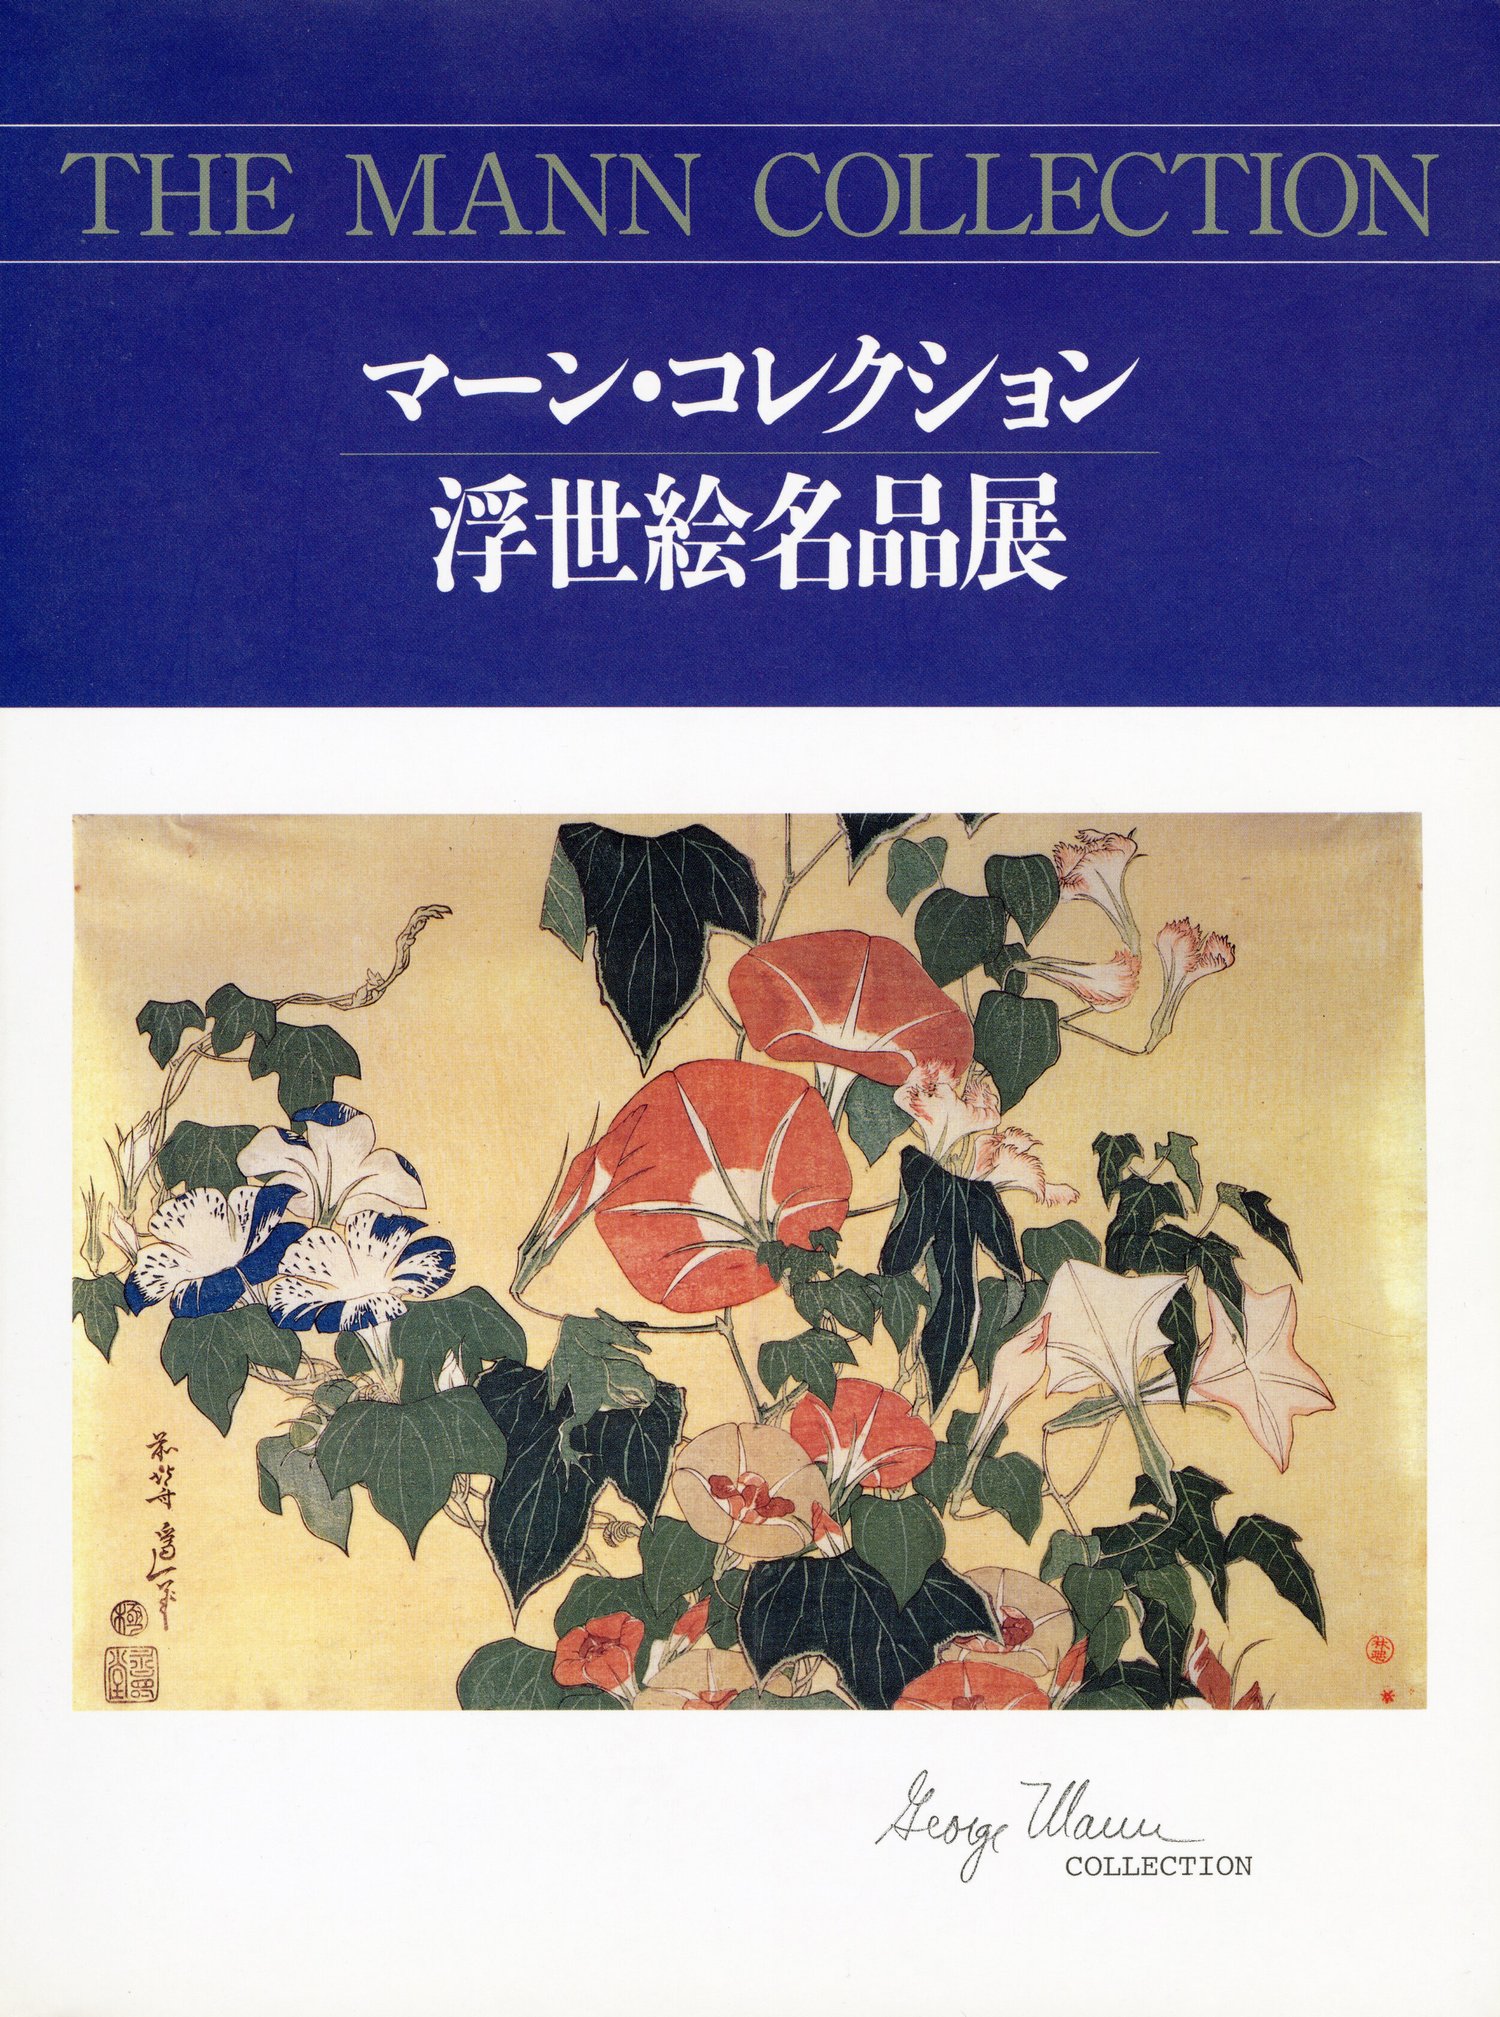 b>The Mann Collection: Exhibition of Ukiyo-e Masterpieces</b>$150</em> —  COLLECTING JAPANESE PRINTS